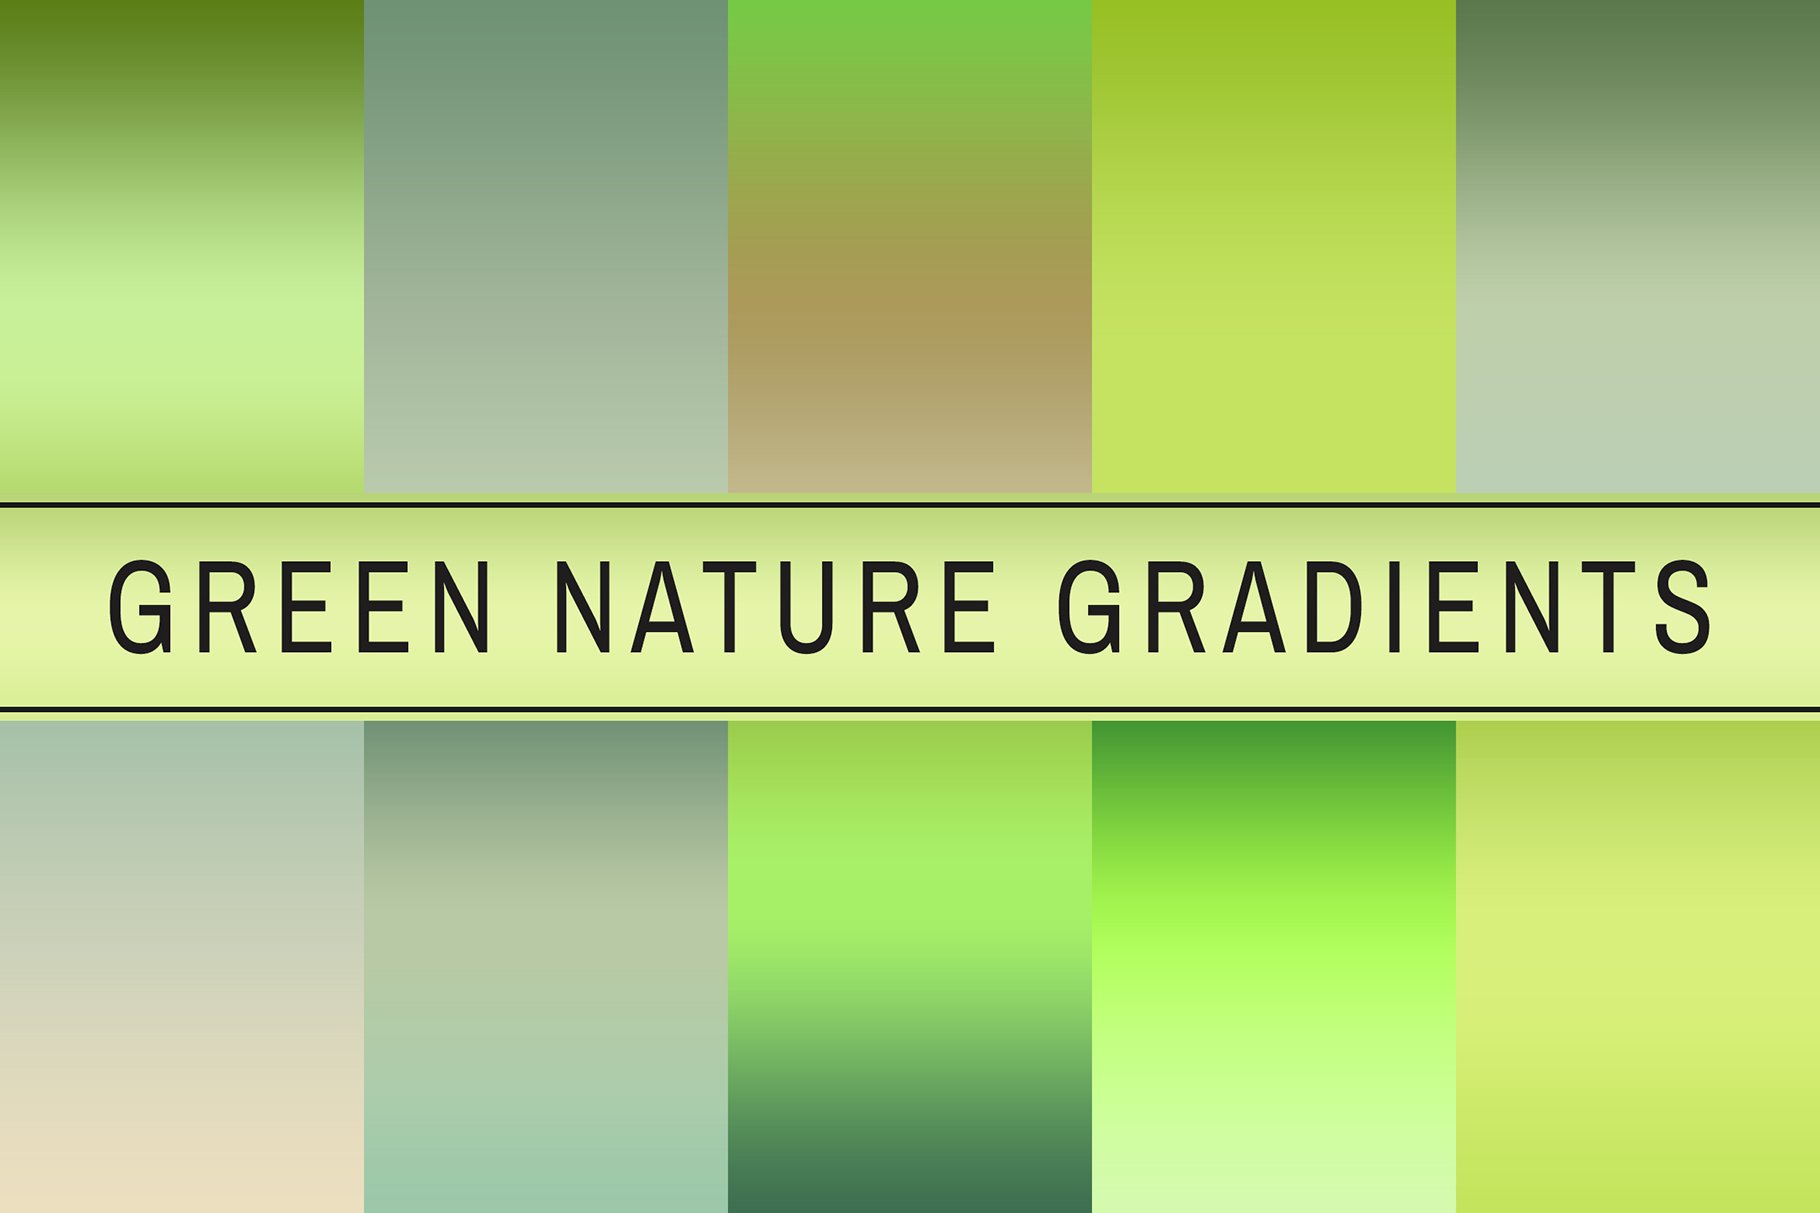 Green Nature Gradients cover image.